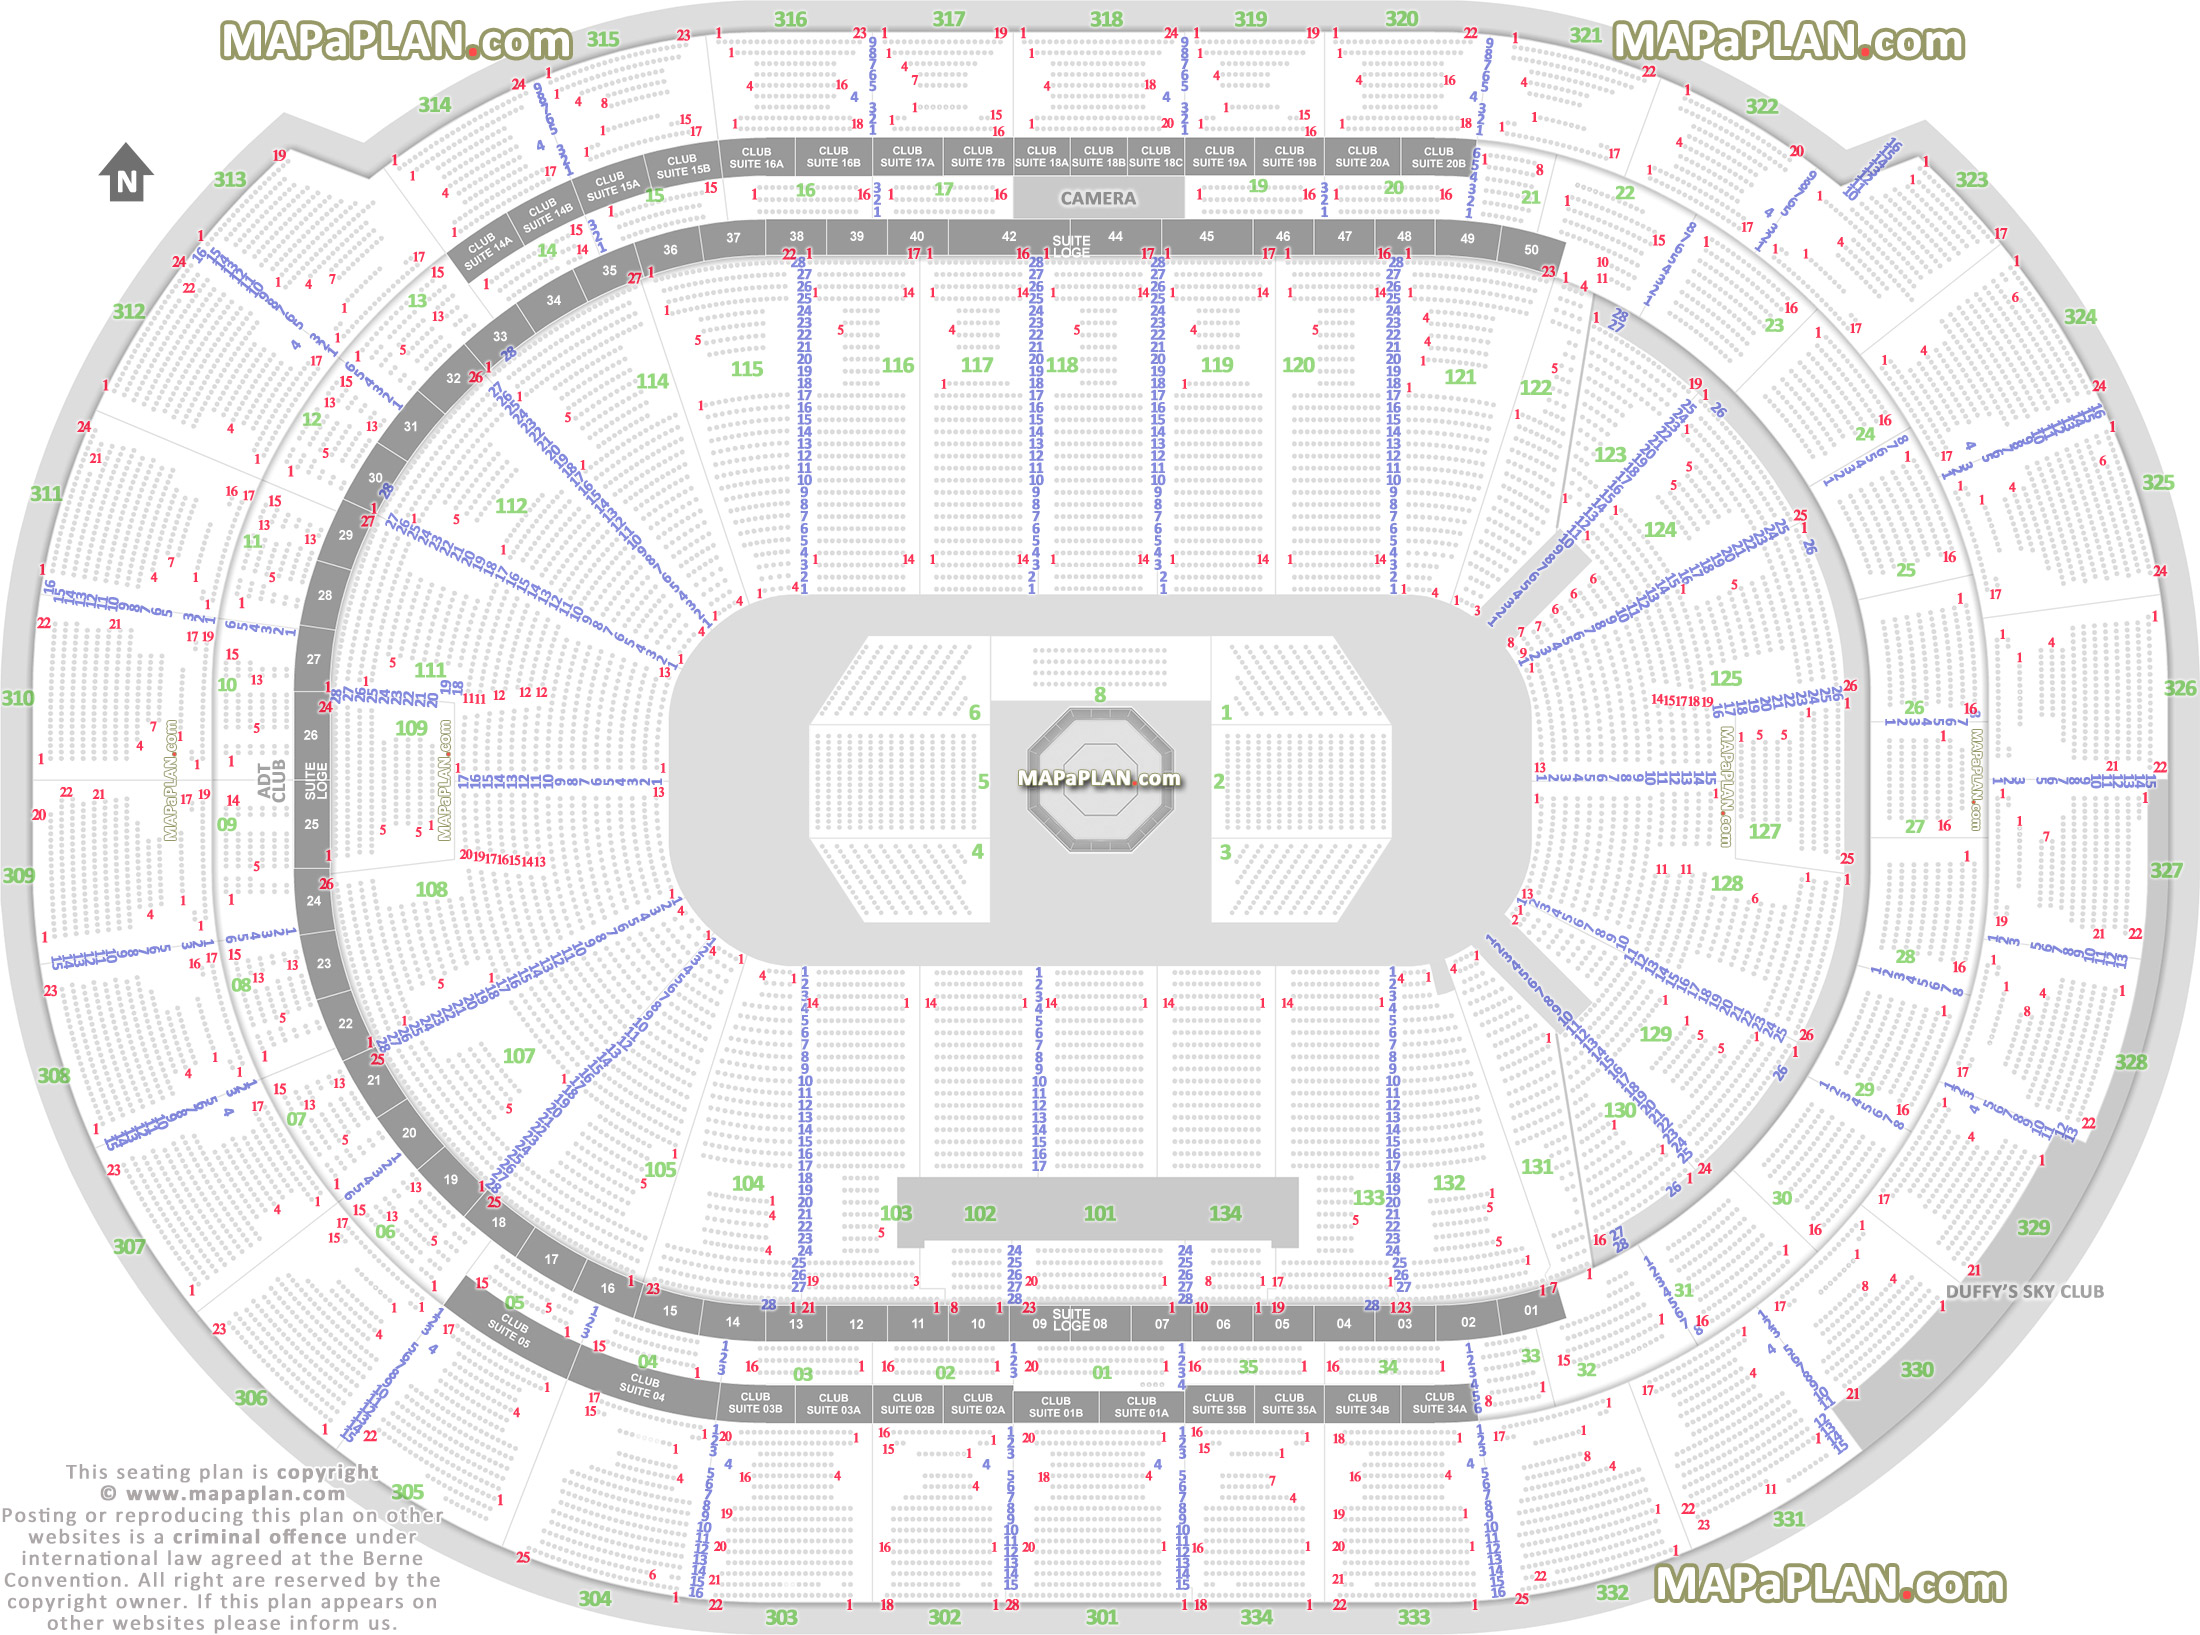 ufc mma fights fully seated setup chart viewer premium executive vip lounge wheelchair disabled seating row 3 section 302 304 306 308 309 310 311 Sunrise BBT Center seating chart